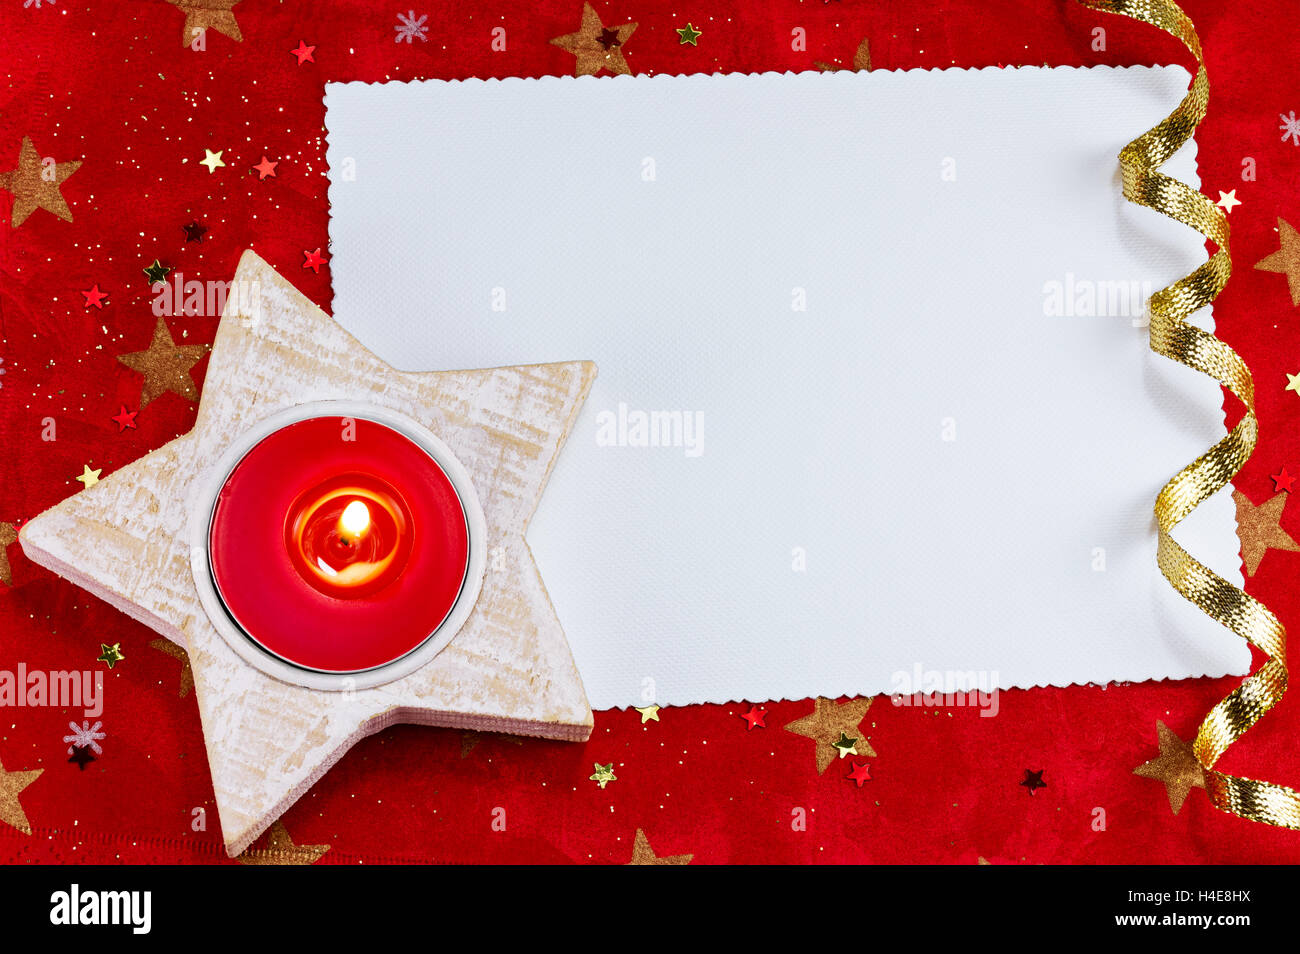 Greeting card with candle and ribbon against a red background Stock Photo